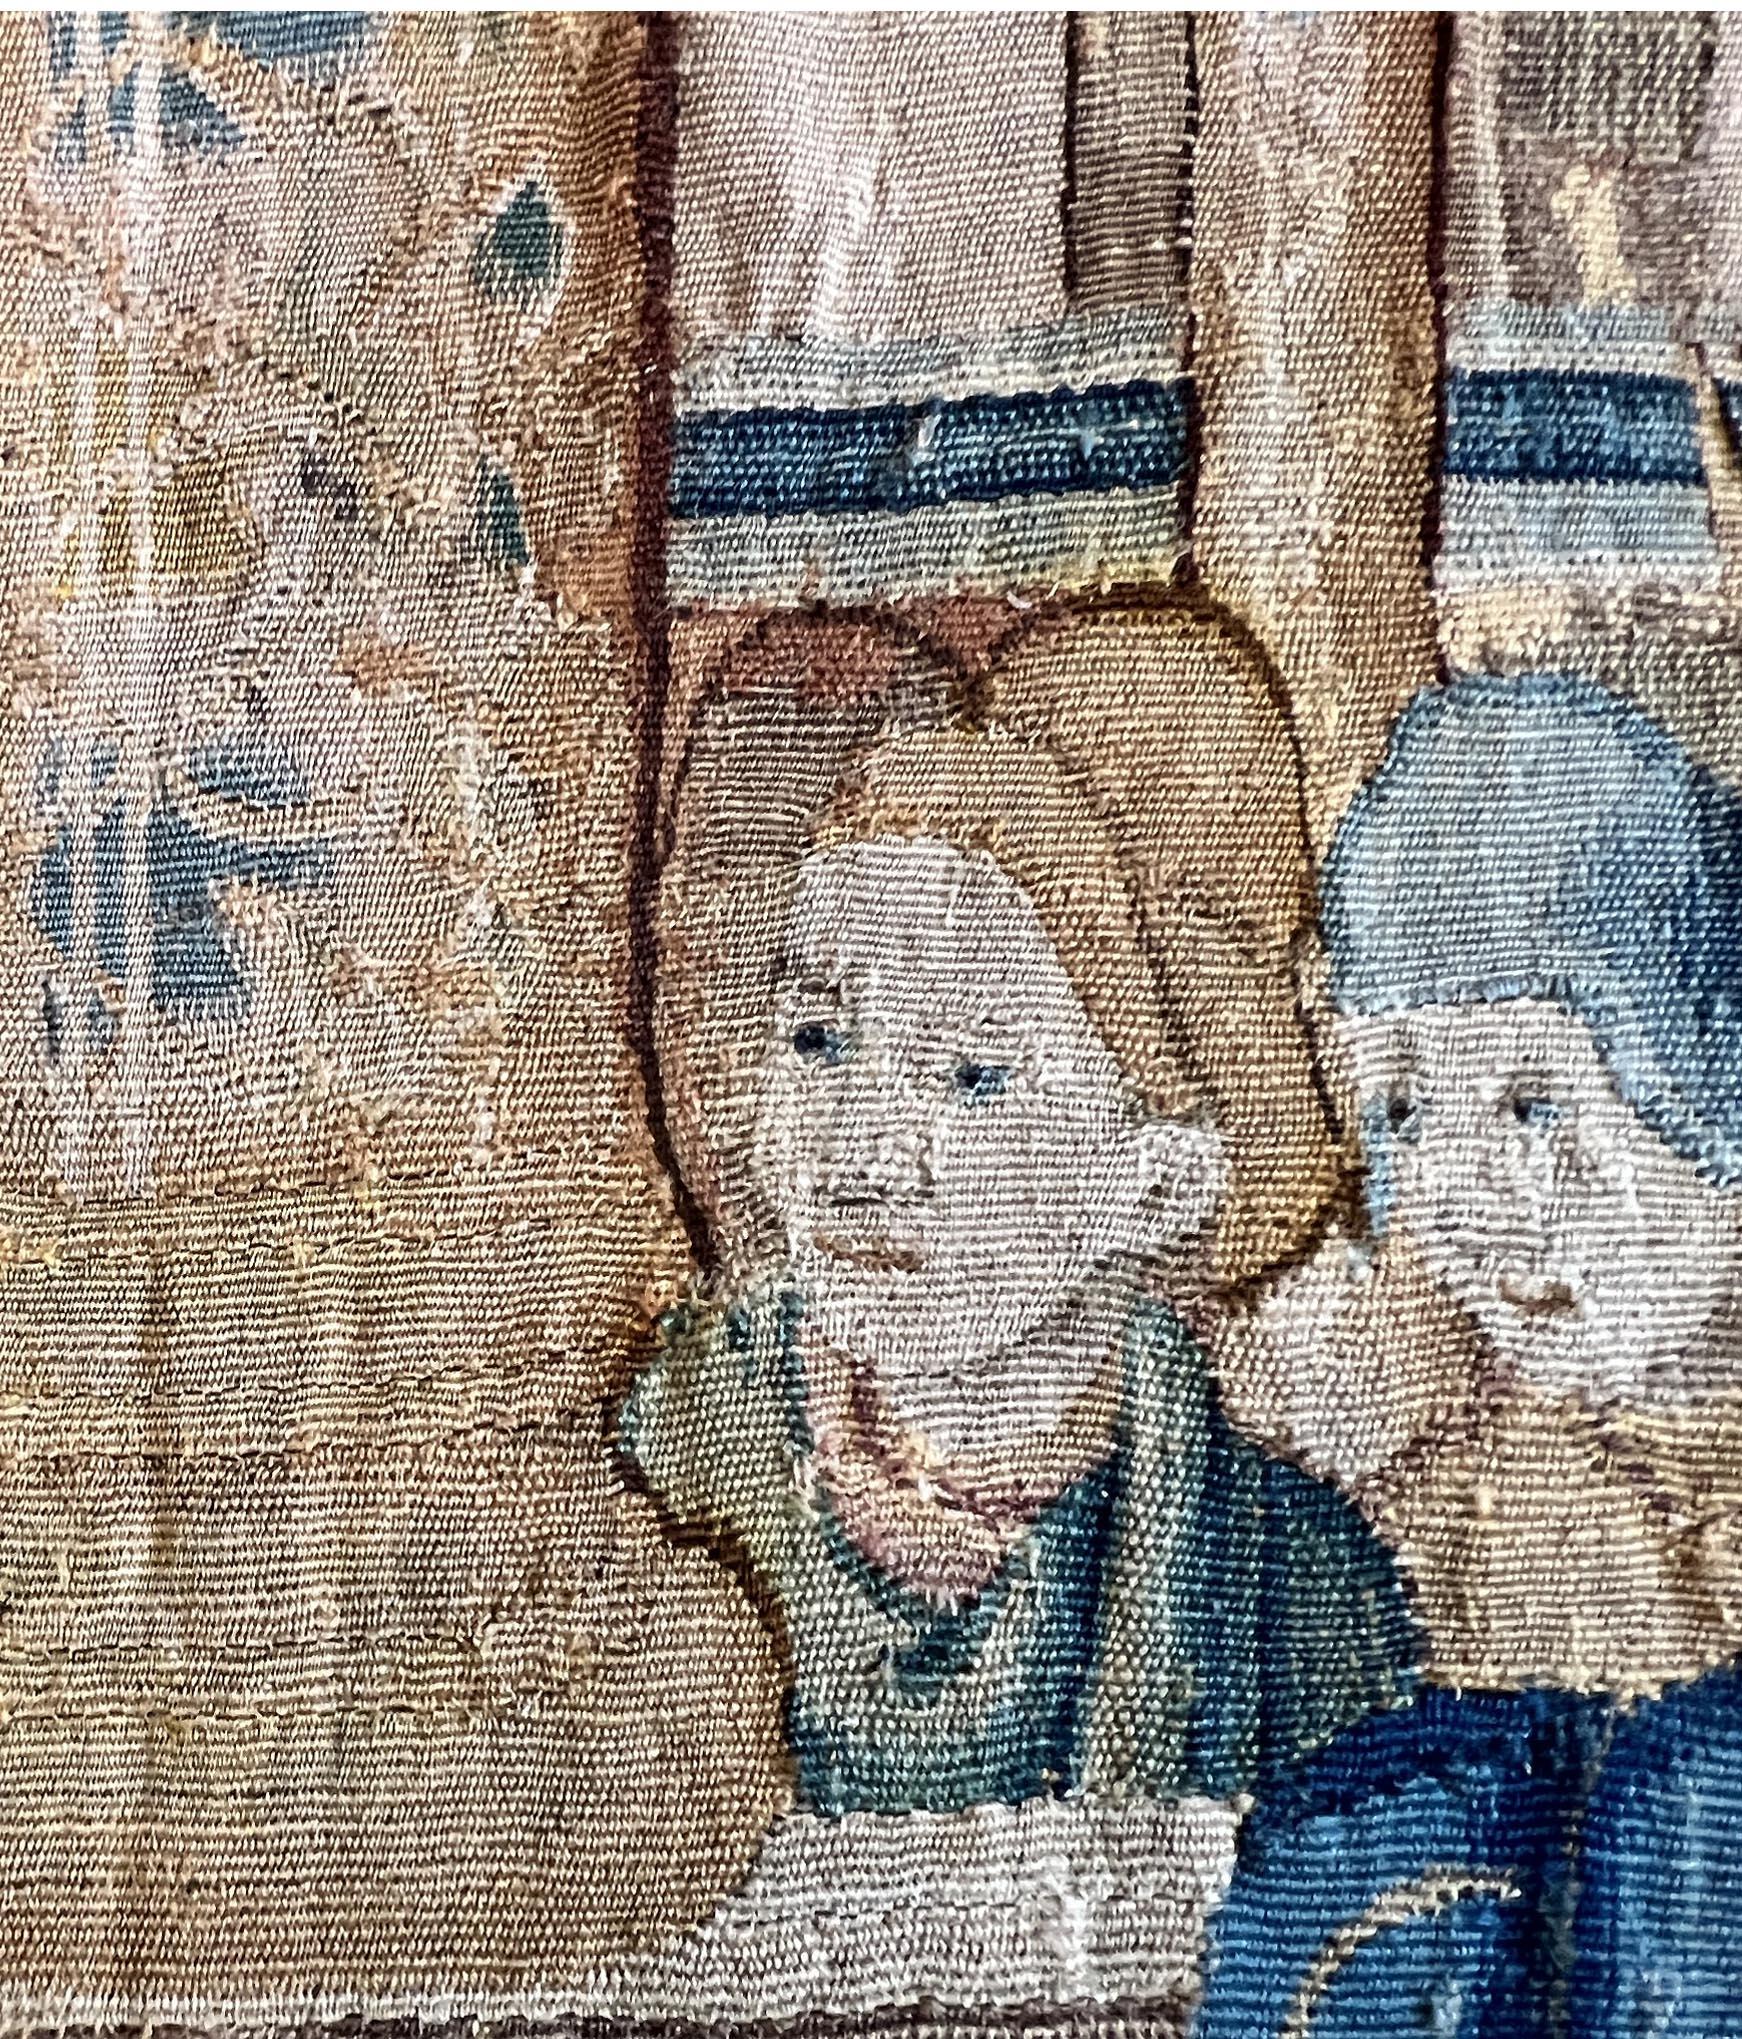 Hand-Woven Sublime Flanders Tapestry - end of 16th century - N° 891 For Sale